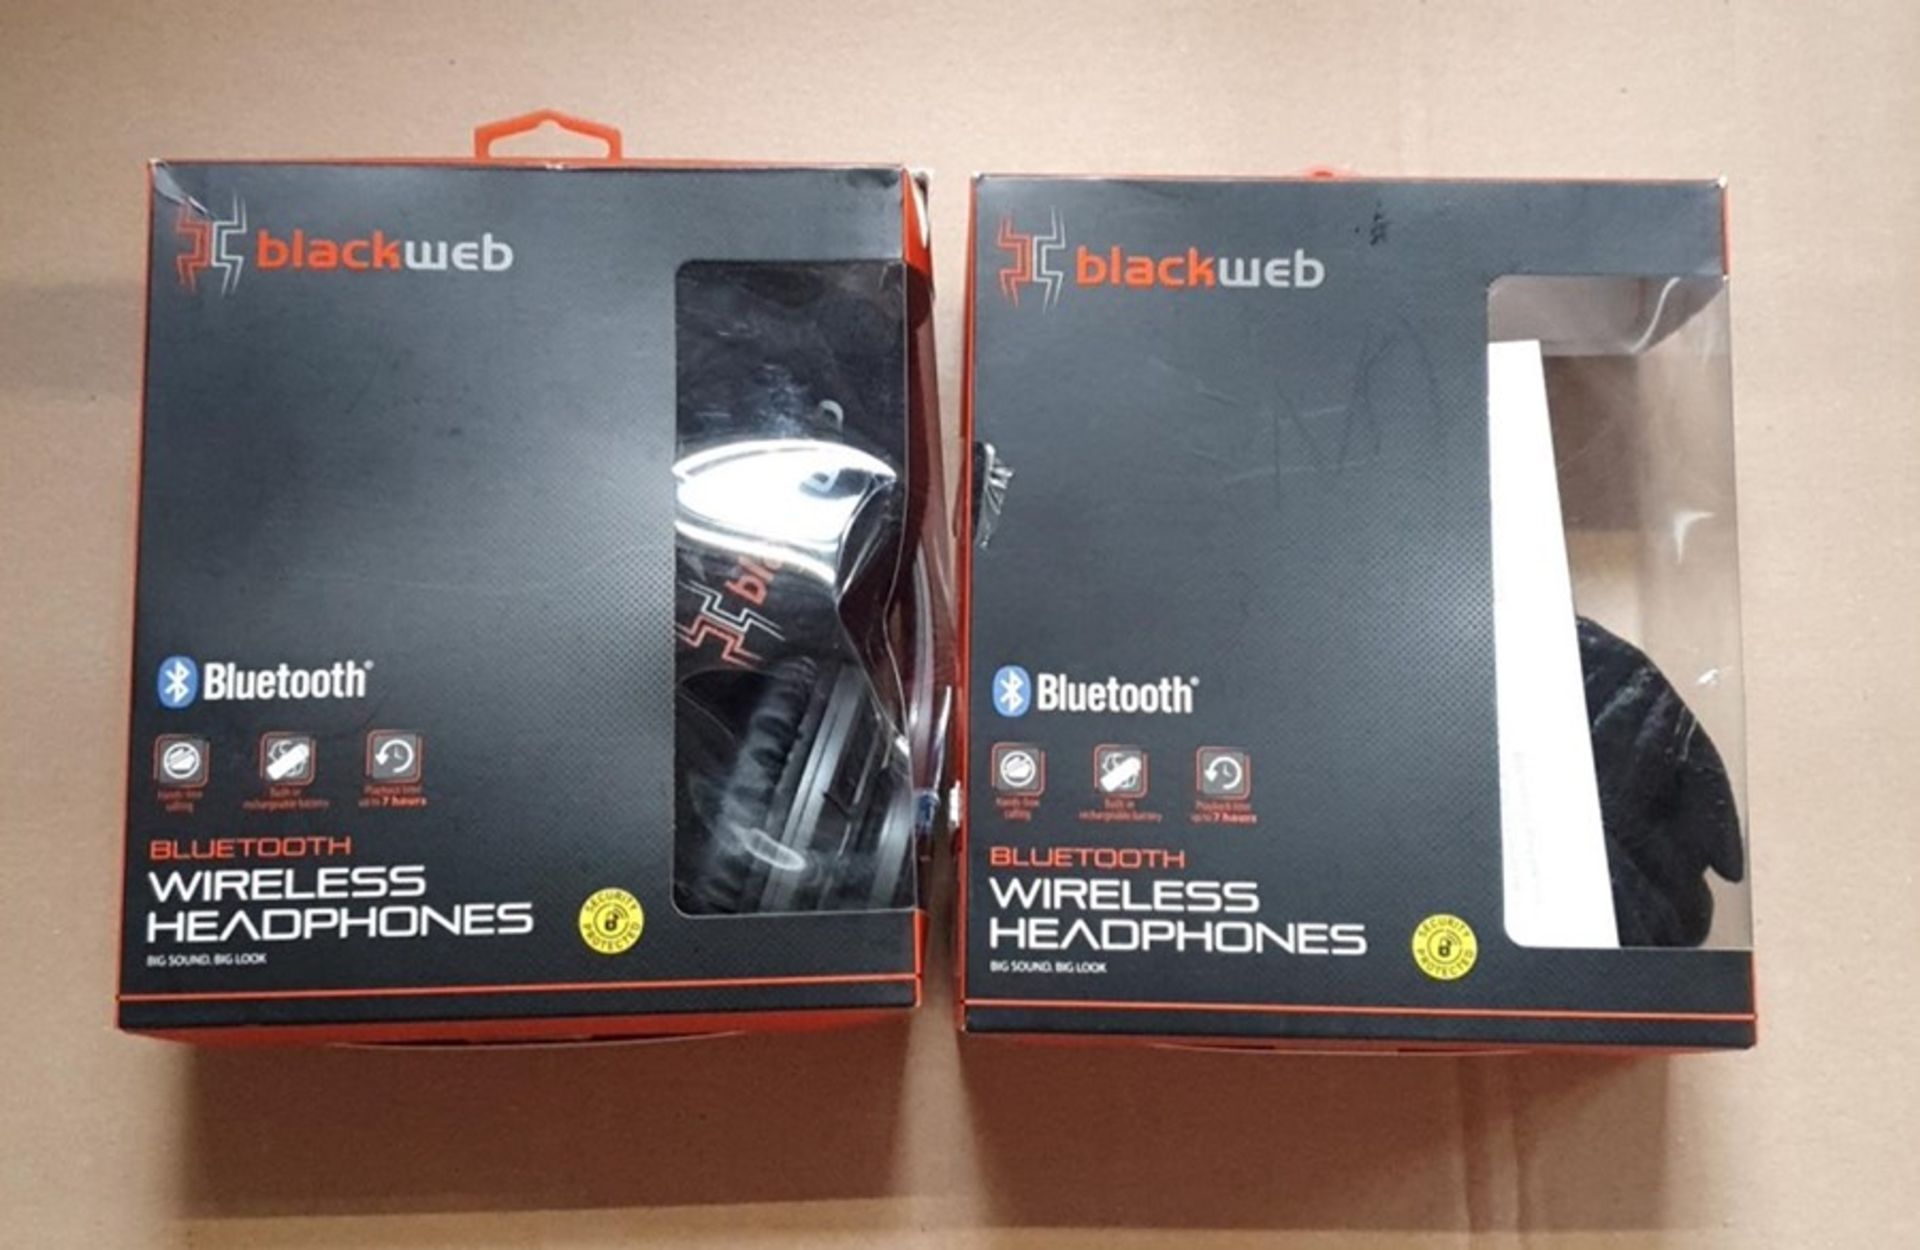 1 LOT TO CONTAIN 2 BLACKWEB BLUETOOTH WIRELESS HEADPHONES IN GREY - BL 5589 / RRP £50.00 (VIEWING